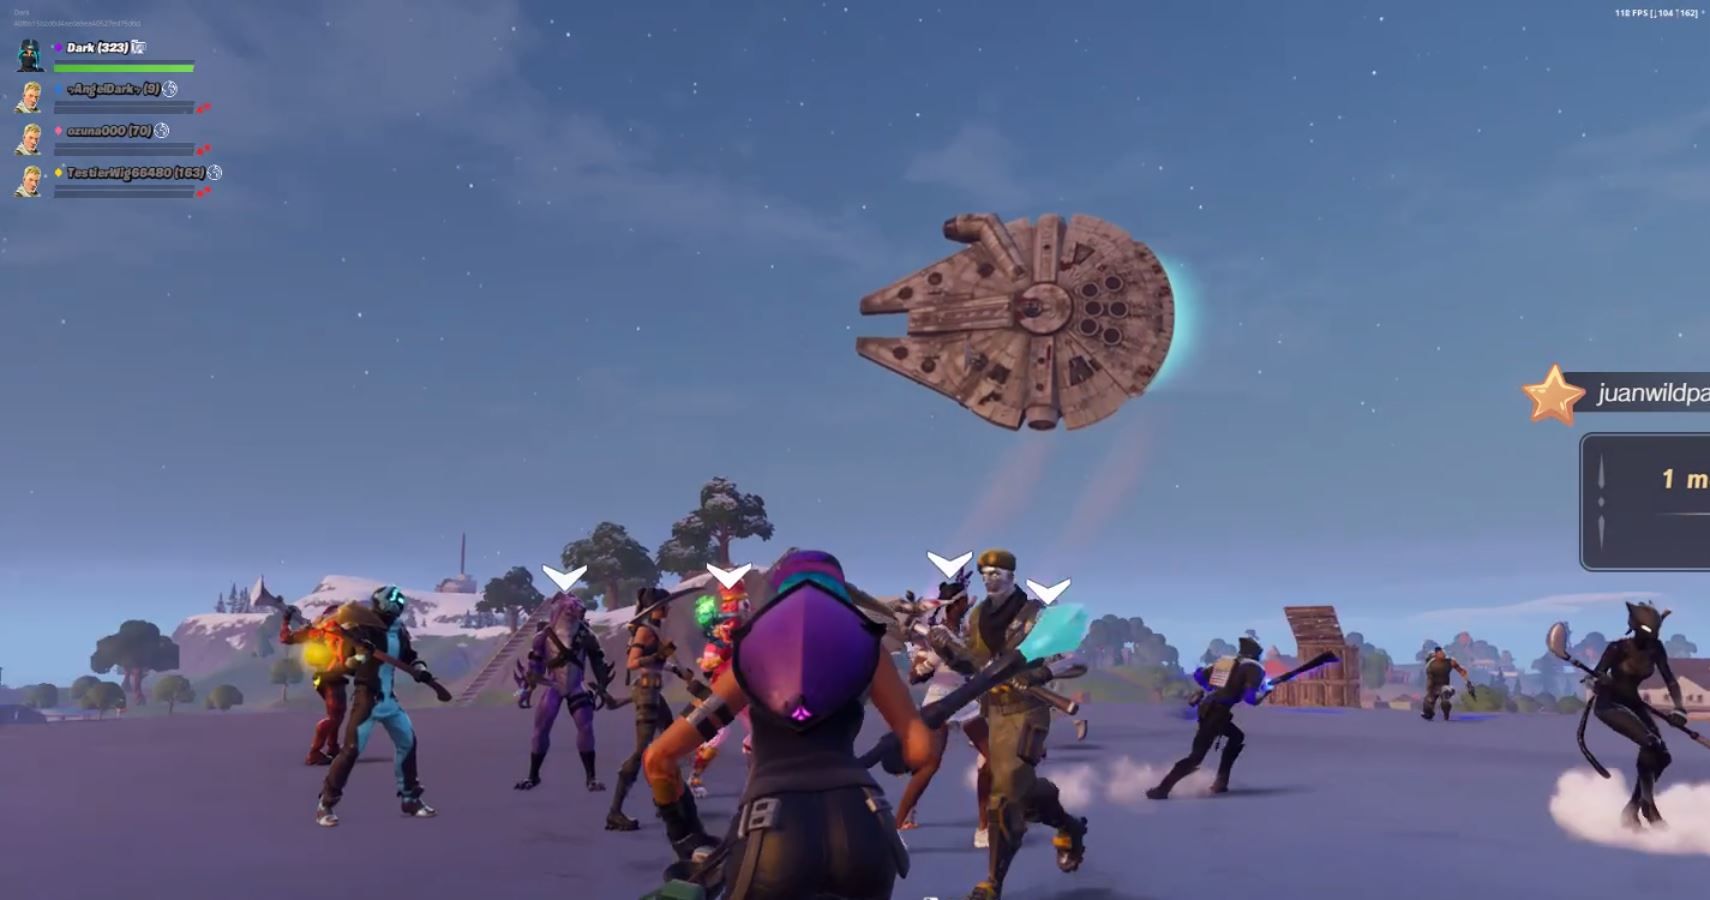 Fortnite X Star Wars Event Adds Lightsabers, Storm Troopers, And More